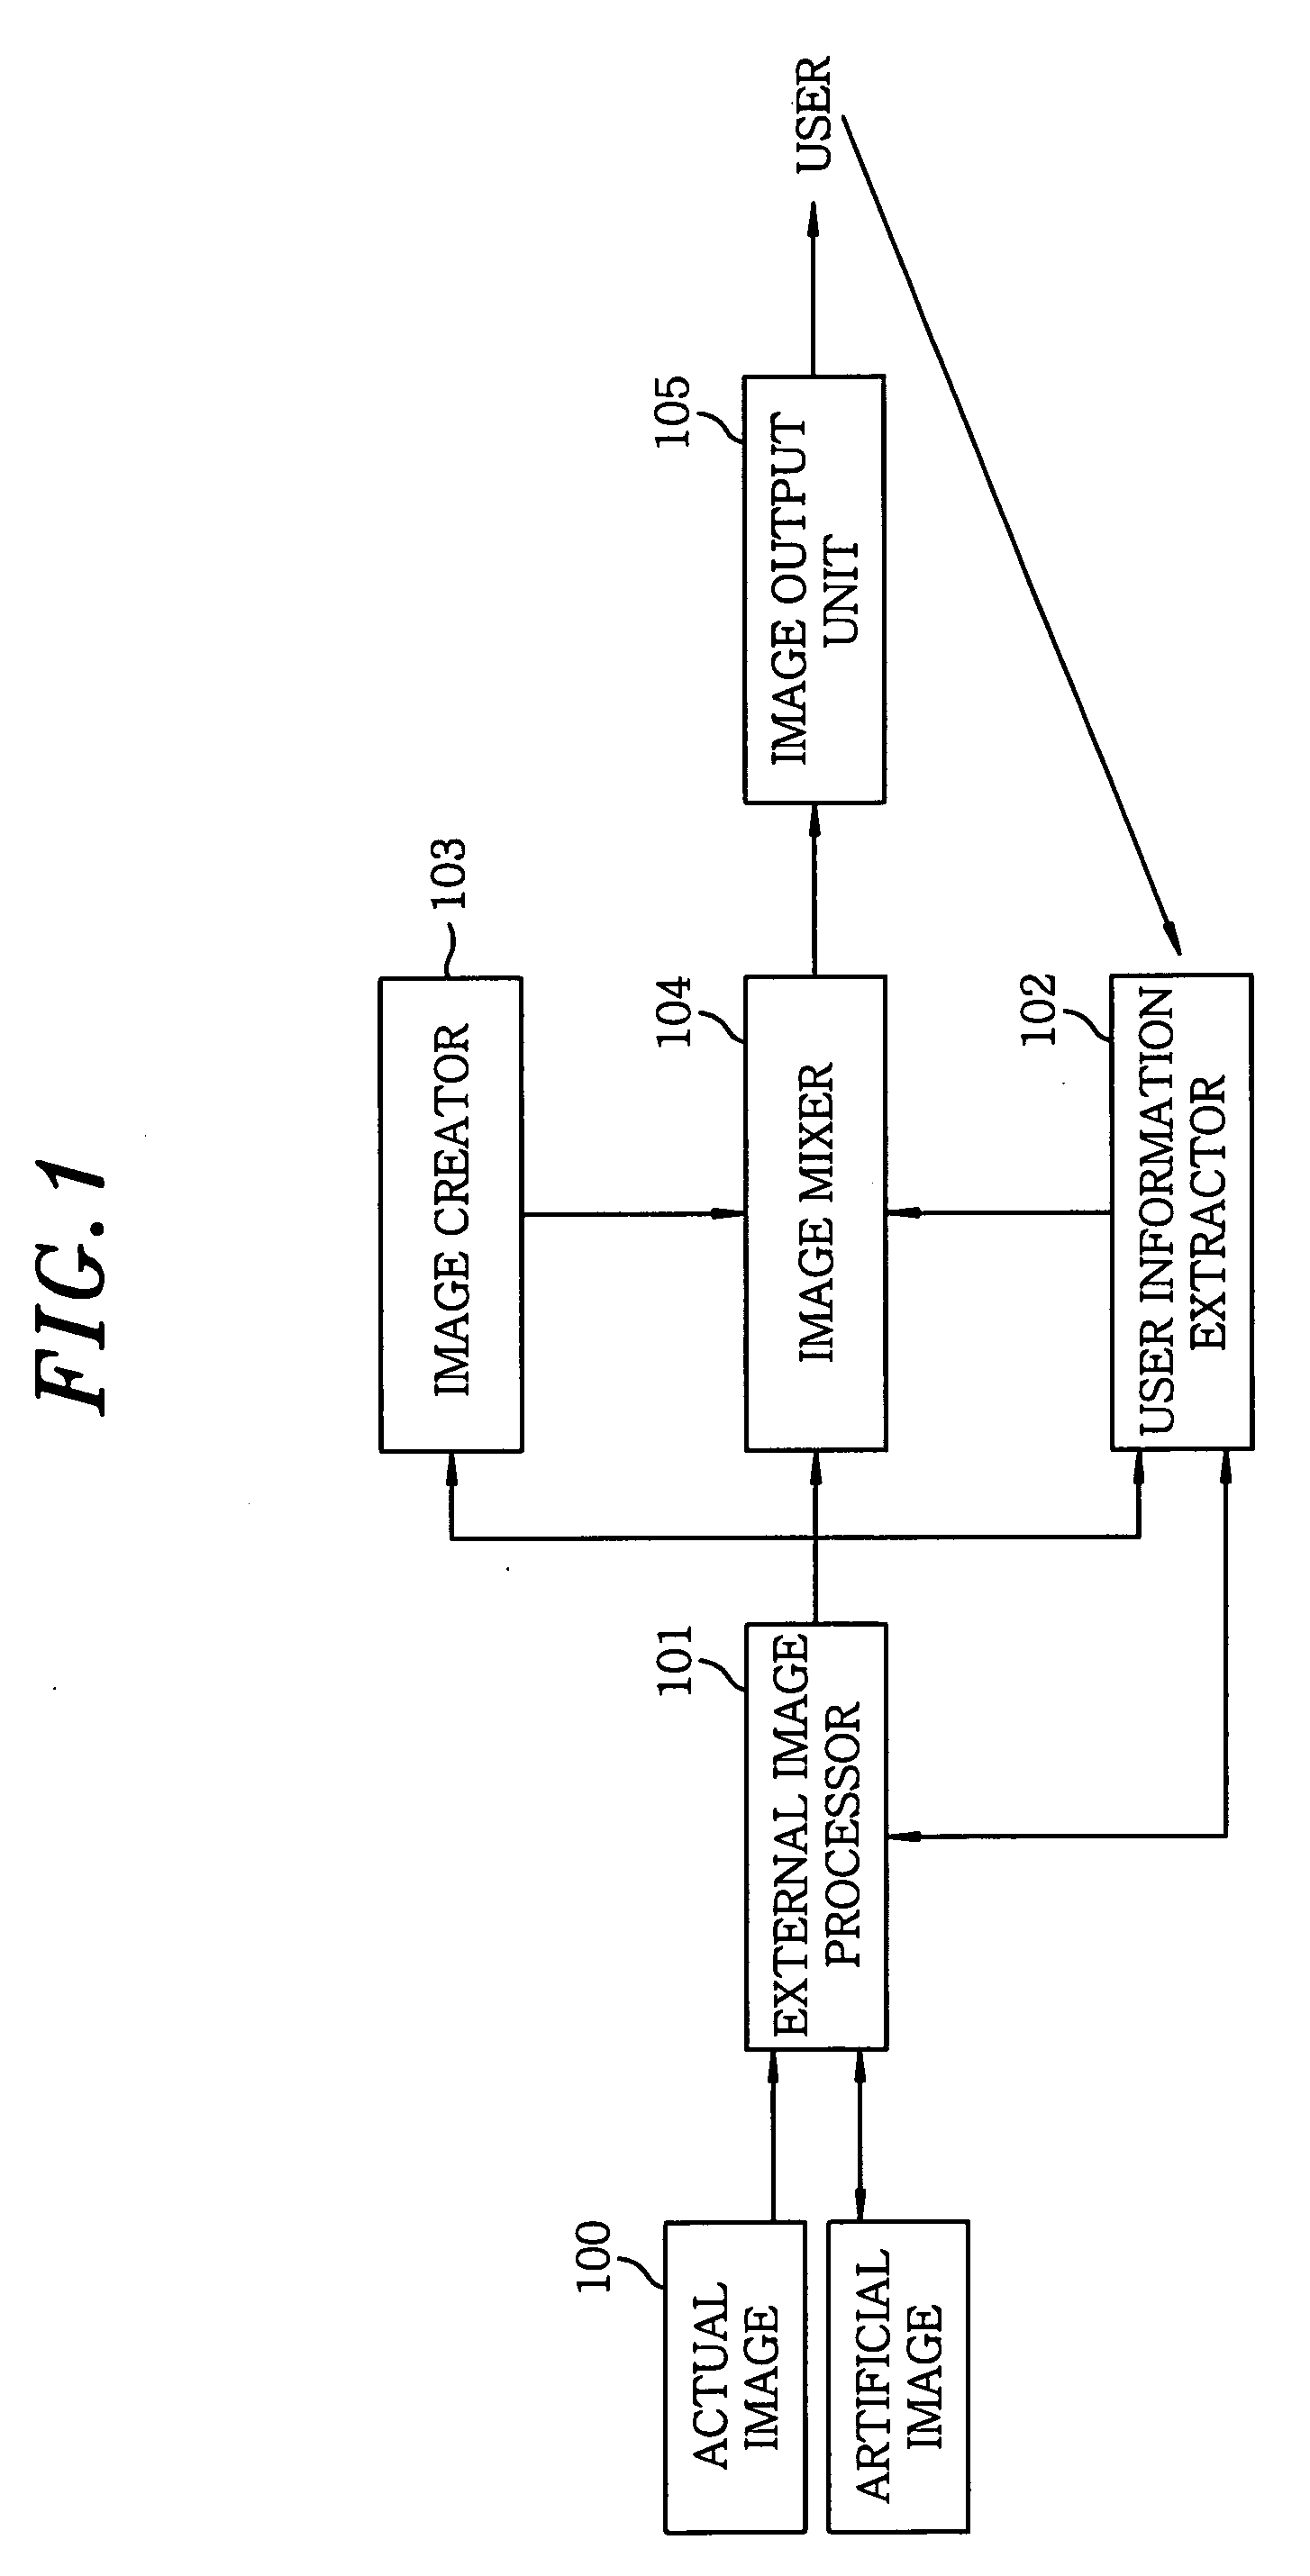 Face-mounted display apparatus for mixed reality environment